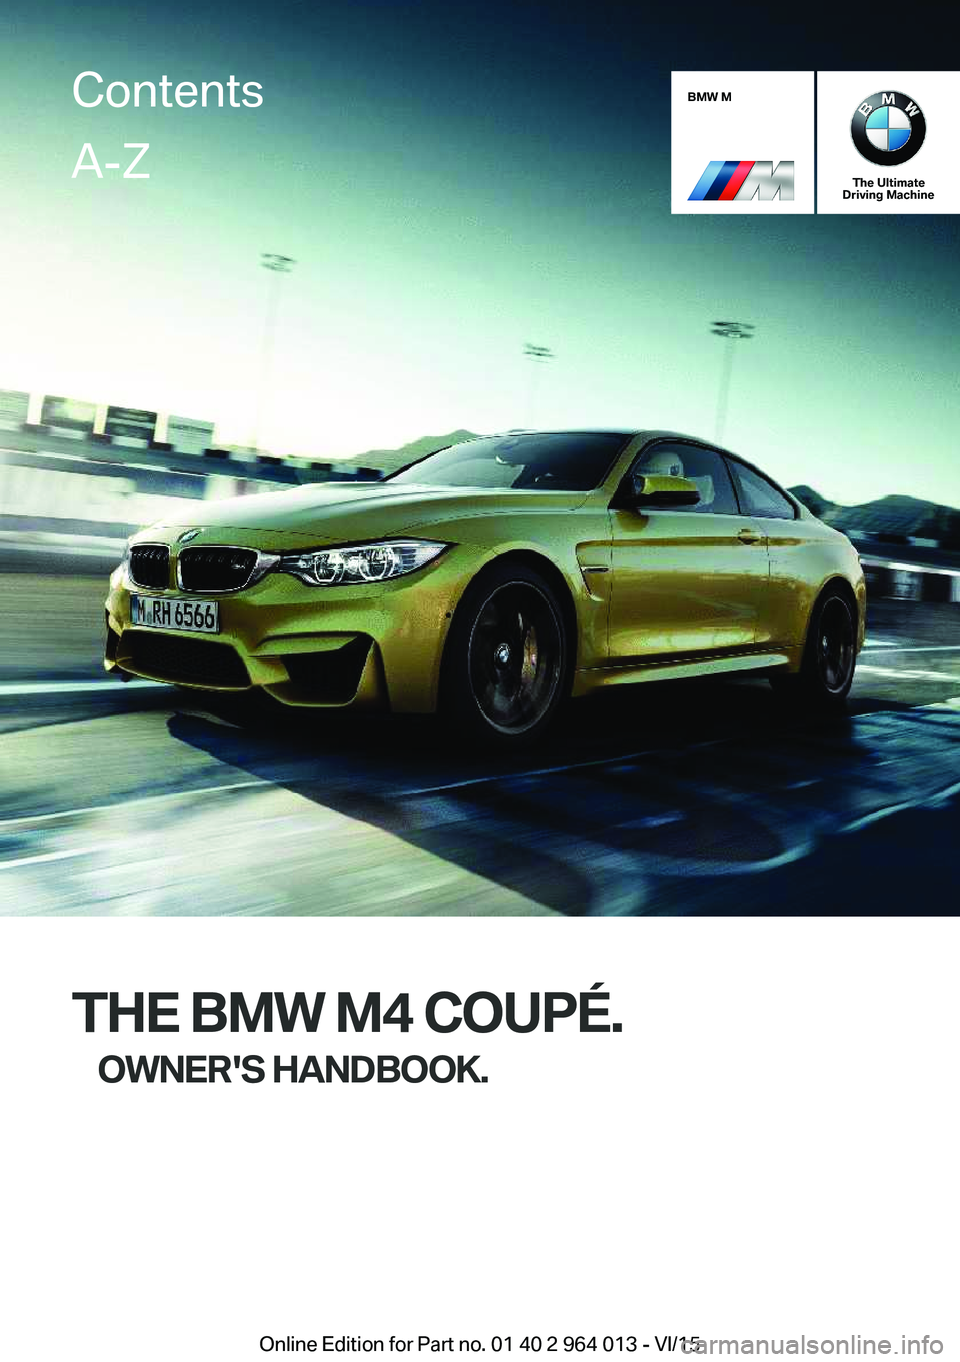 BMW M4 2016  Owners Manual BMW M
The Ultimate
Driving Machine
THE BMW M4 COUPÉ.
OWNER'S HANDBOOK.
ContentsA-Z
Online Edition for Part no. 01 40 2 964 013 - VI/15   